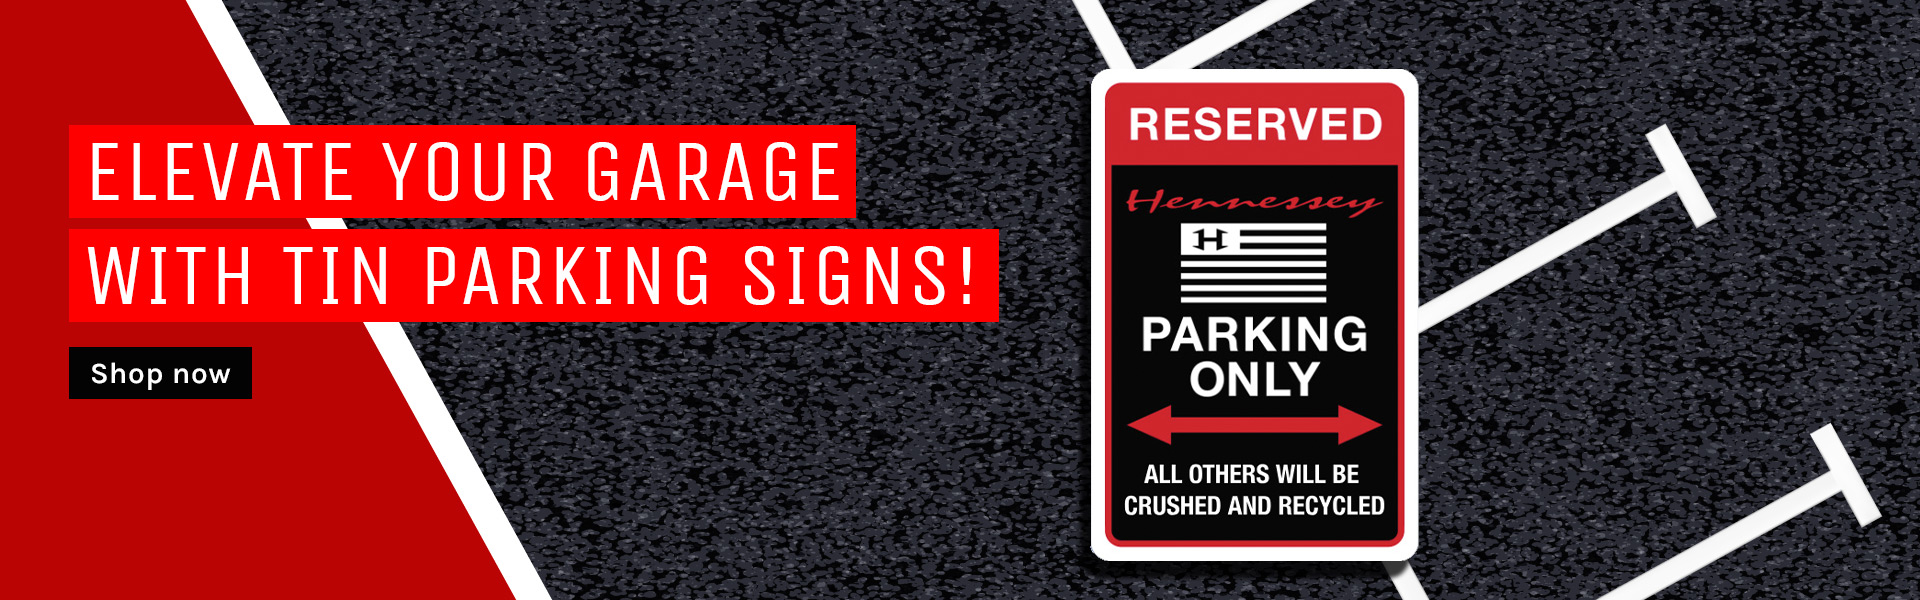 Elevate your garage with tin parking signs!